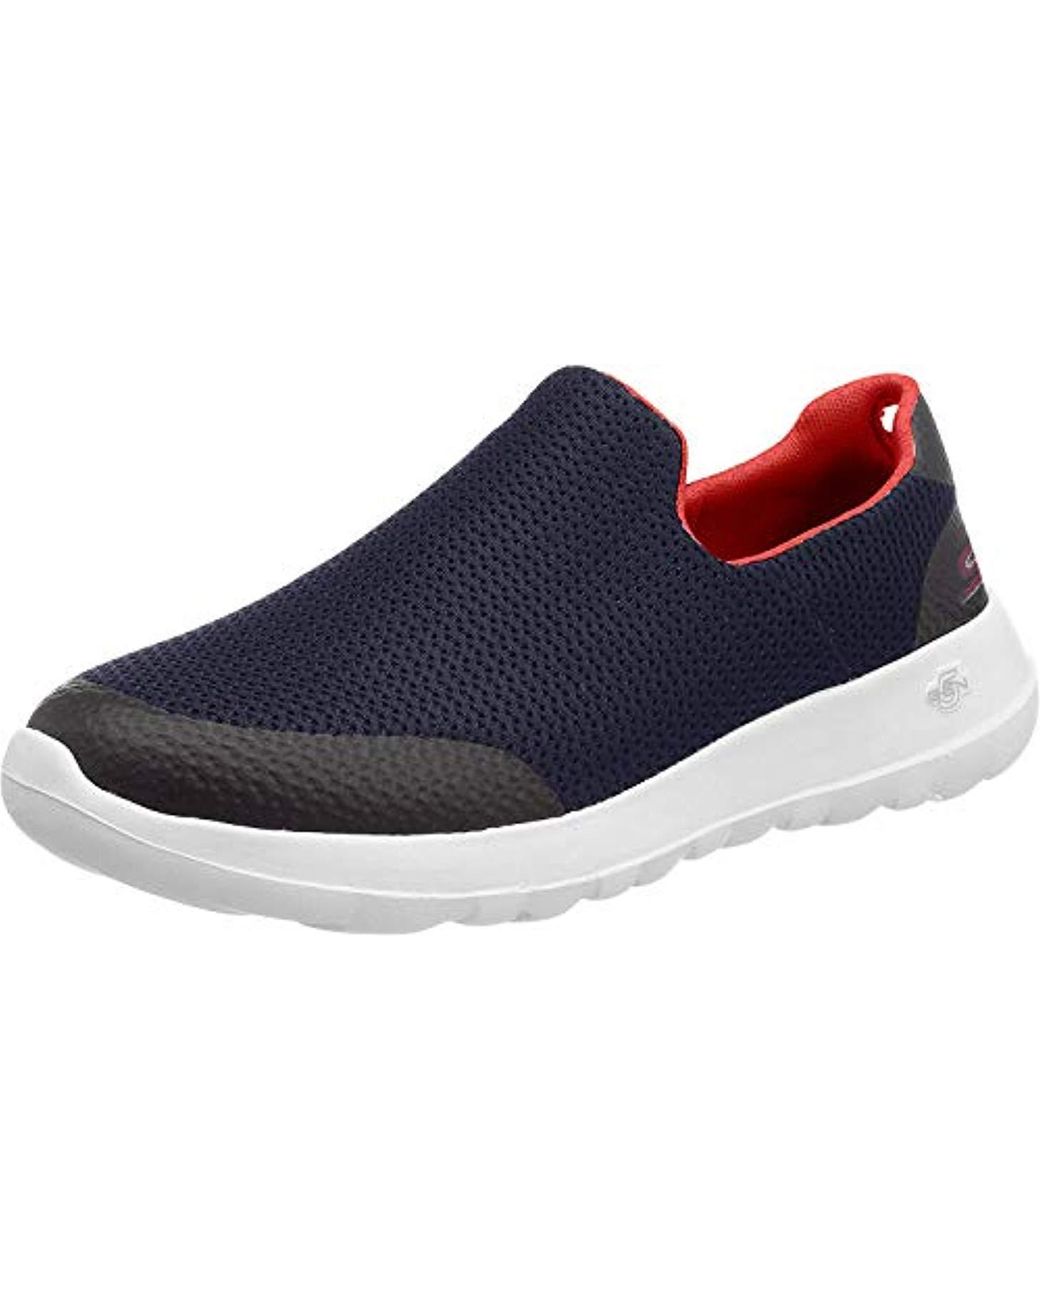 Skechers Go Walk Max Focal Slip On Trainers in Navy/Red (Blue) for Men ...